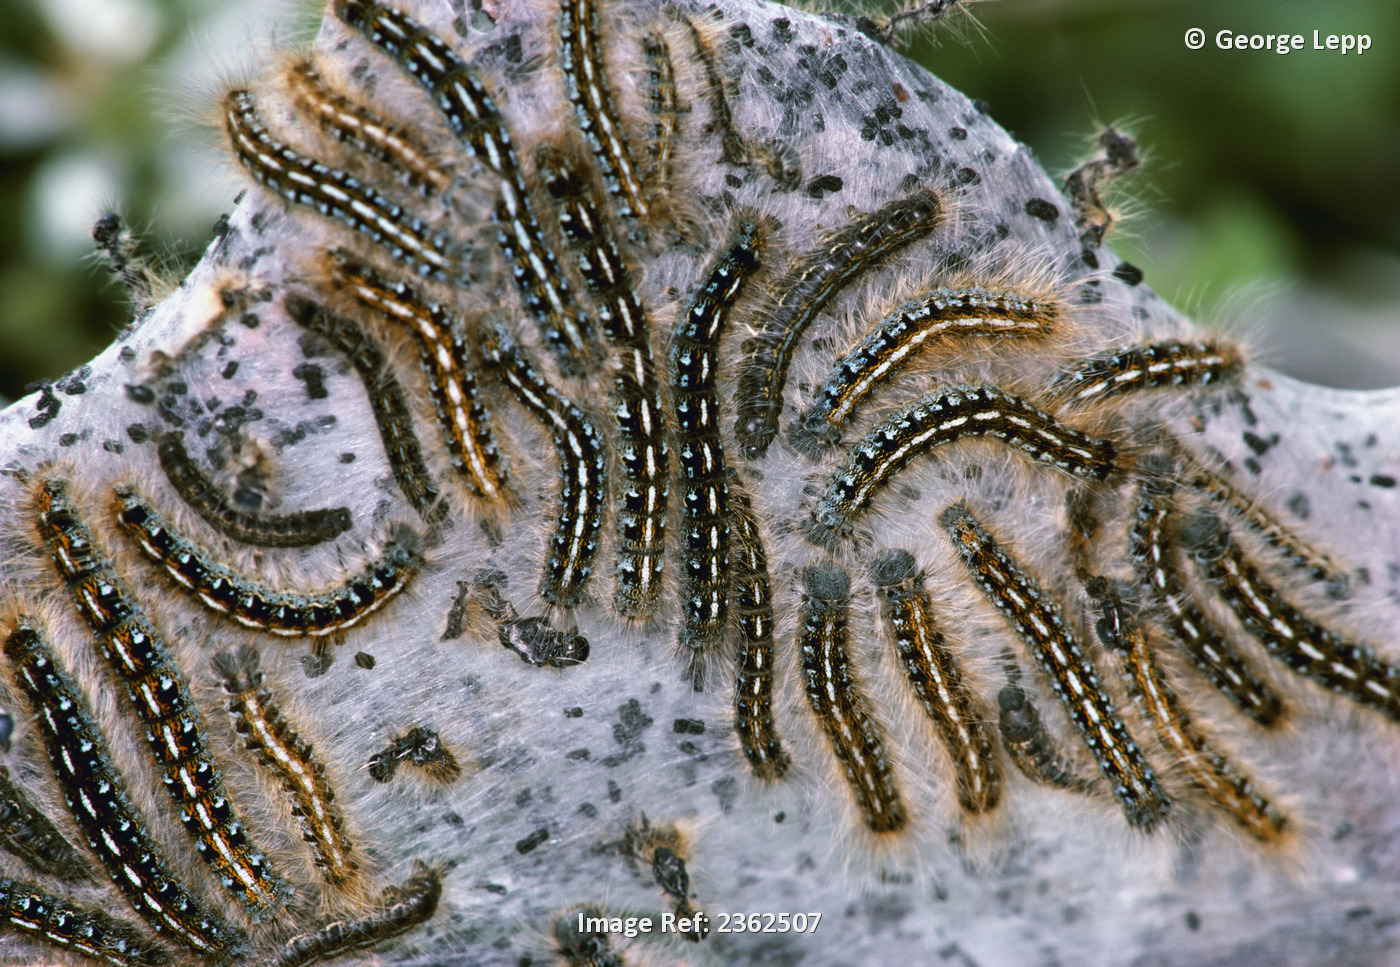 Agriculture - Pest insect, Tent Caterpillar larvae on web (Malacosoma spp.) / ...